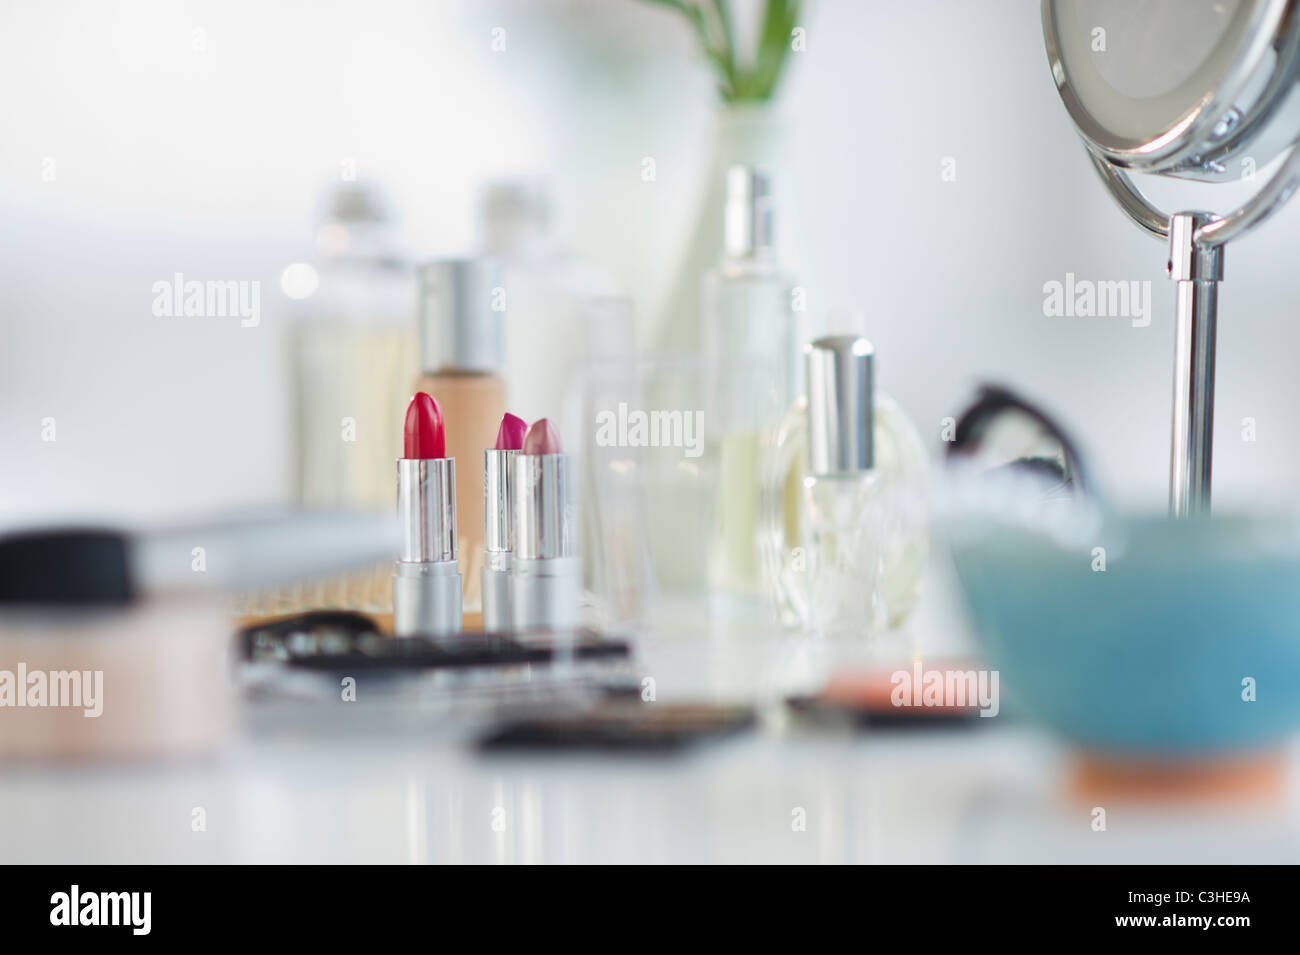 Make-up cosmetics on table Stock Photo